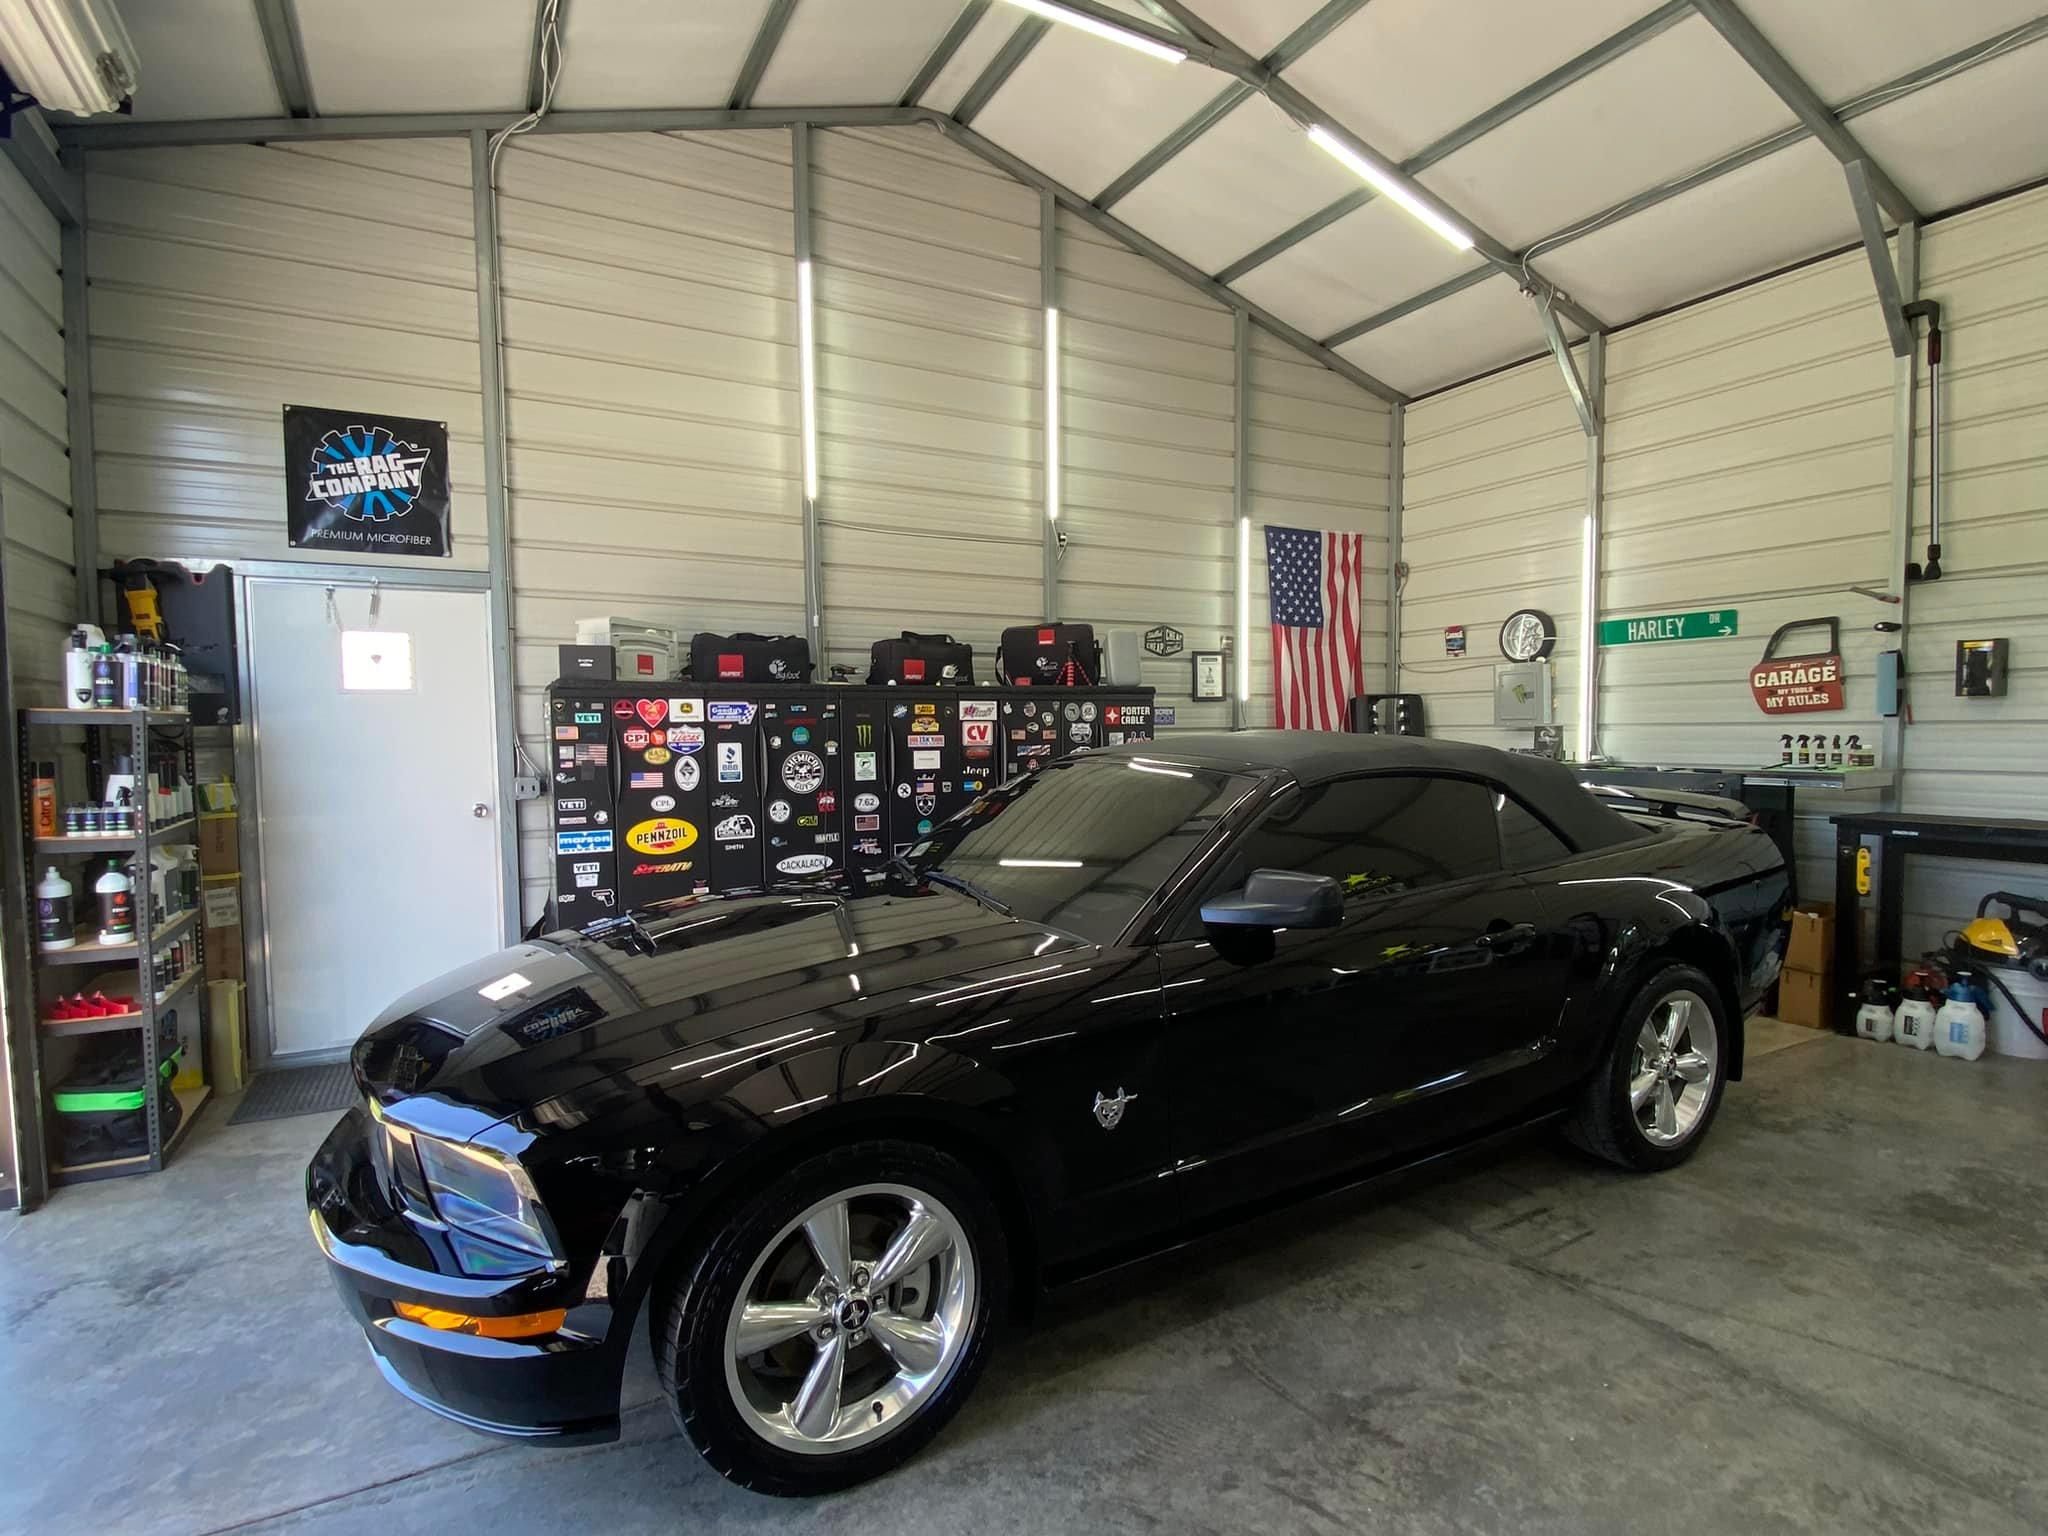 Ceramic Coating for Diamond Touch Auto Detailing in Taylorsville, NC